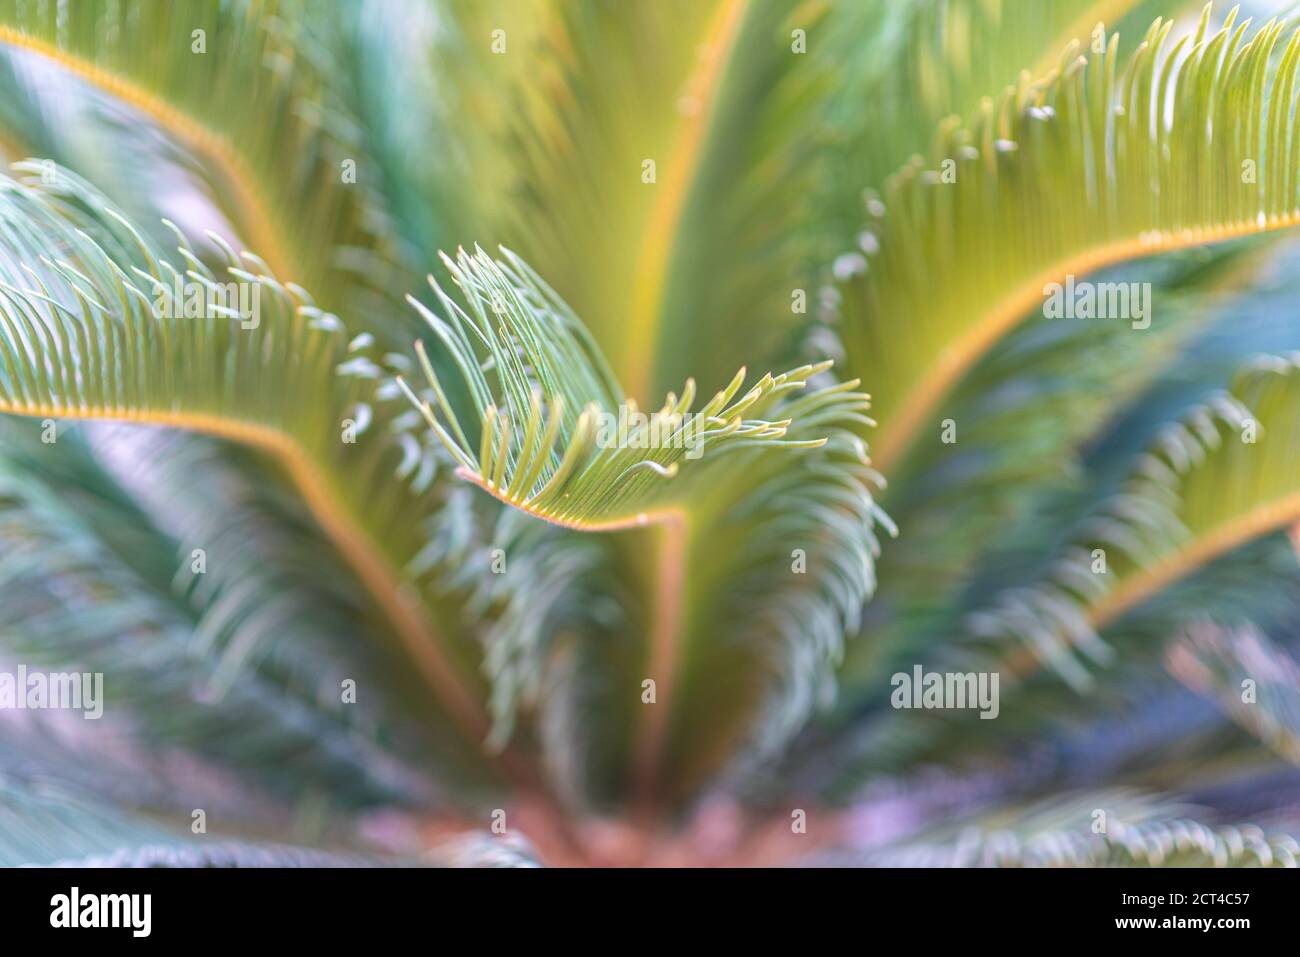 Abstract Palm Tree Details Blurred Background. Summer Day. Stock Photo